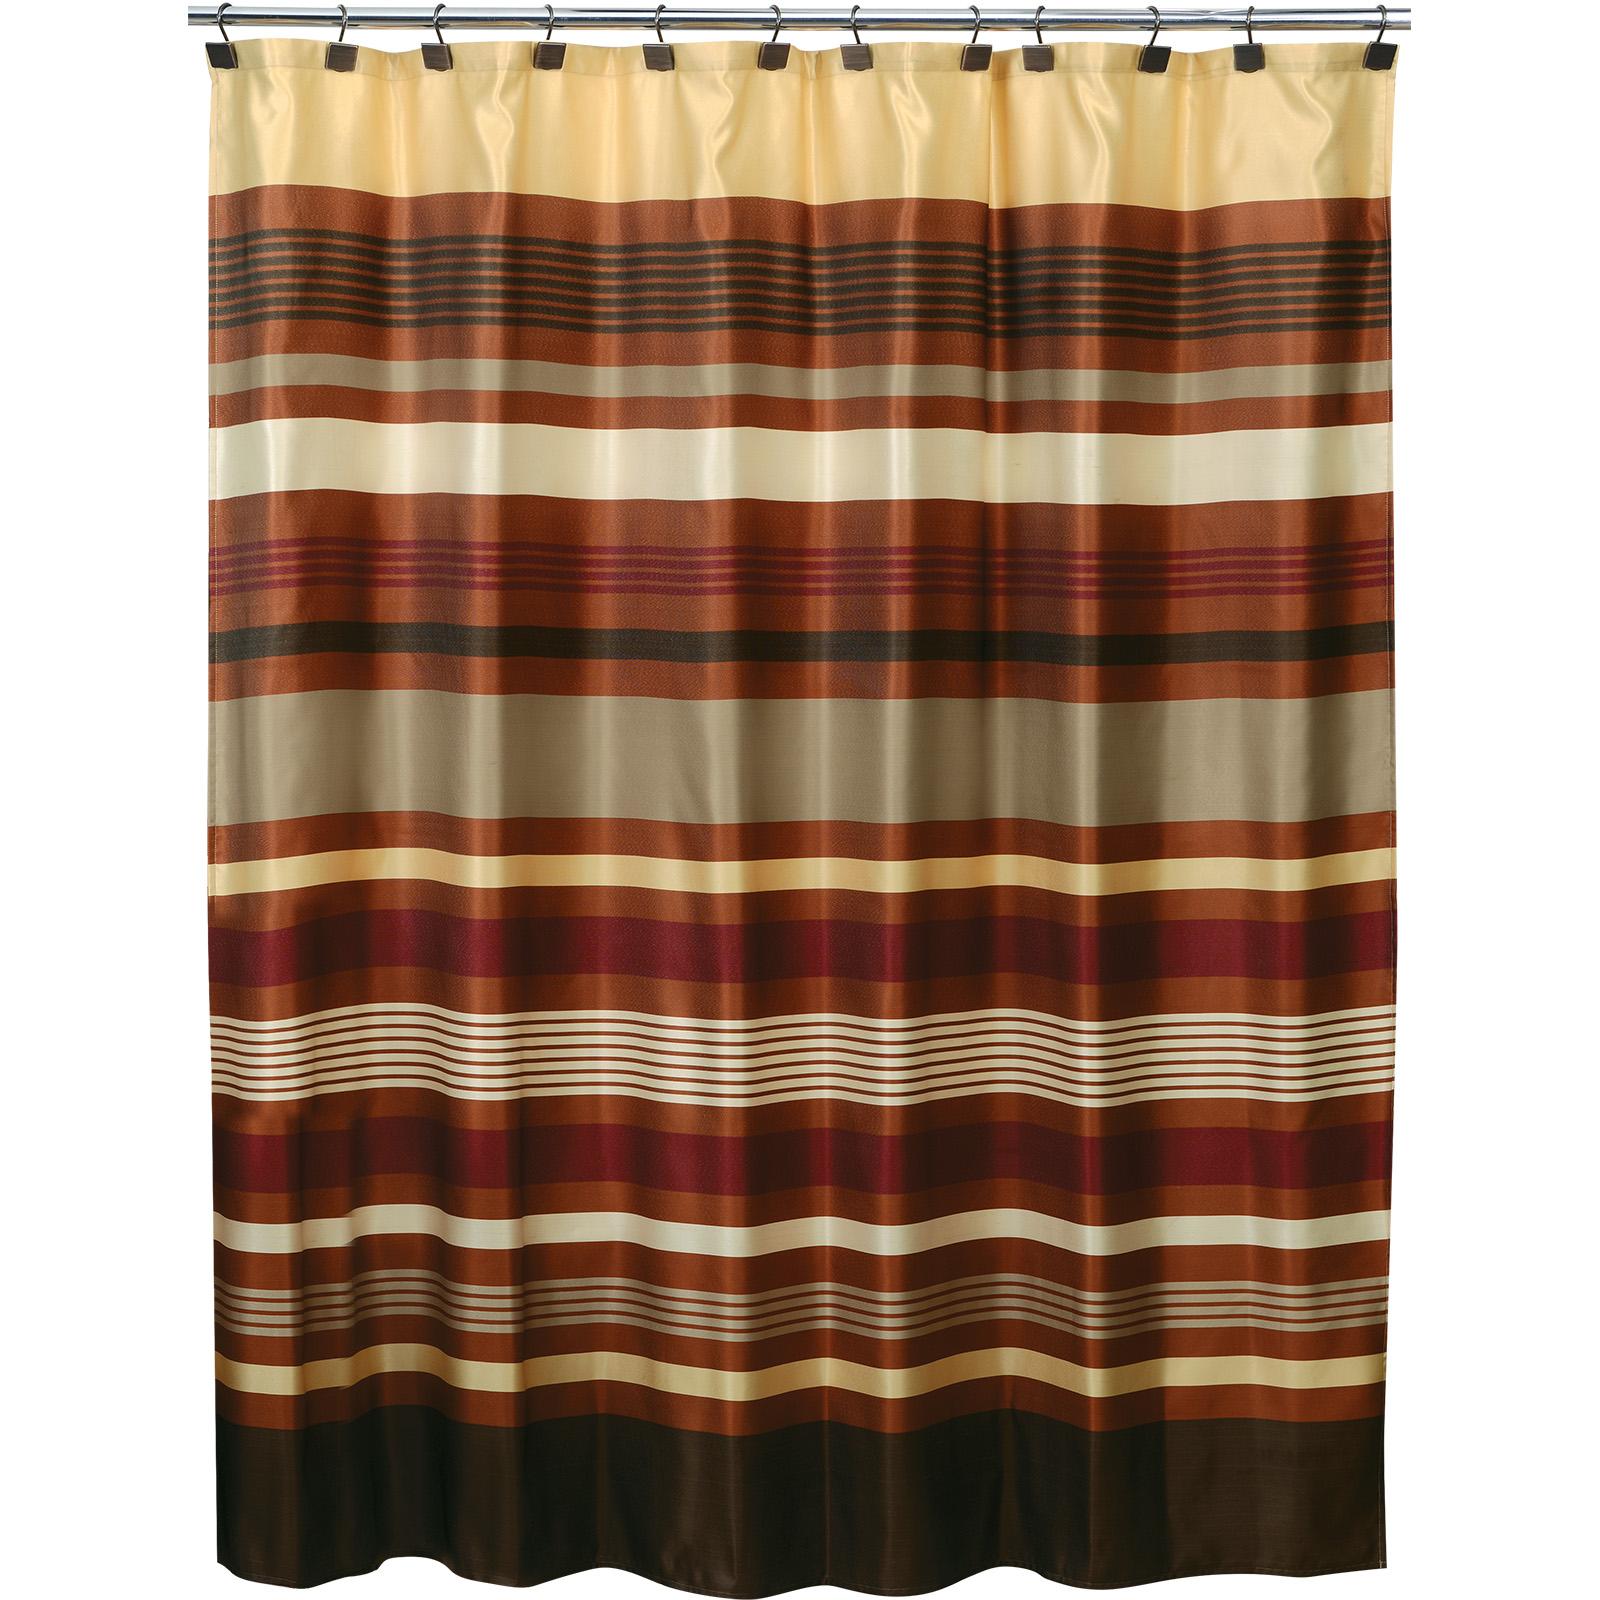 Cannon Shower Curtain - Variegated Stripe